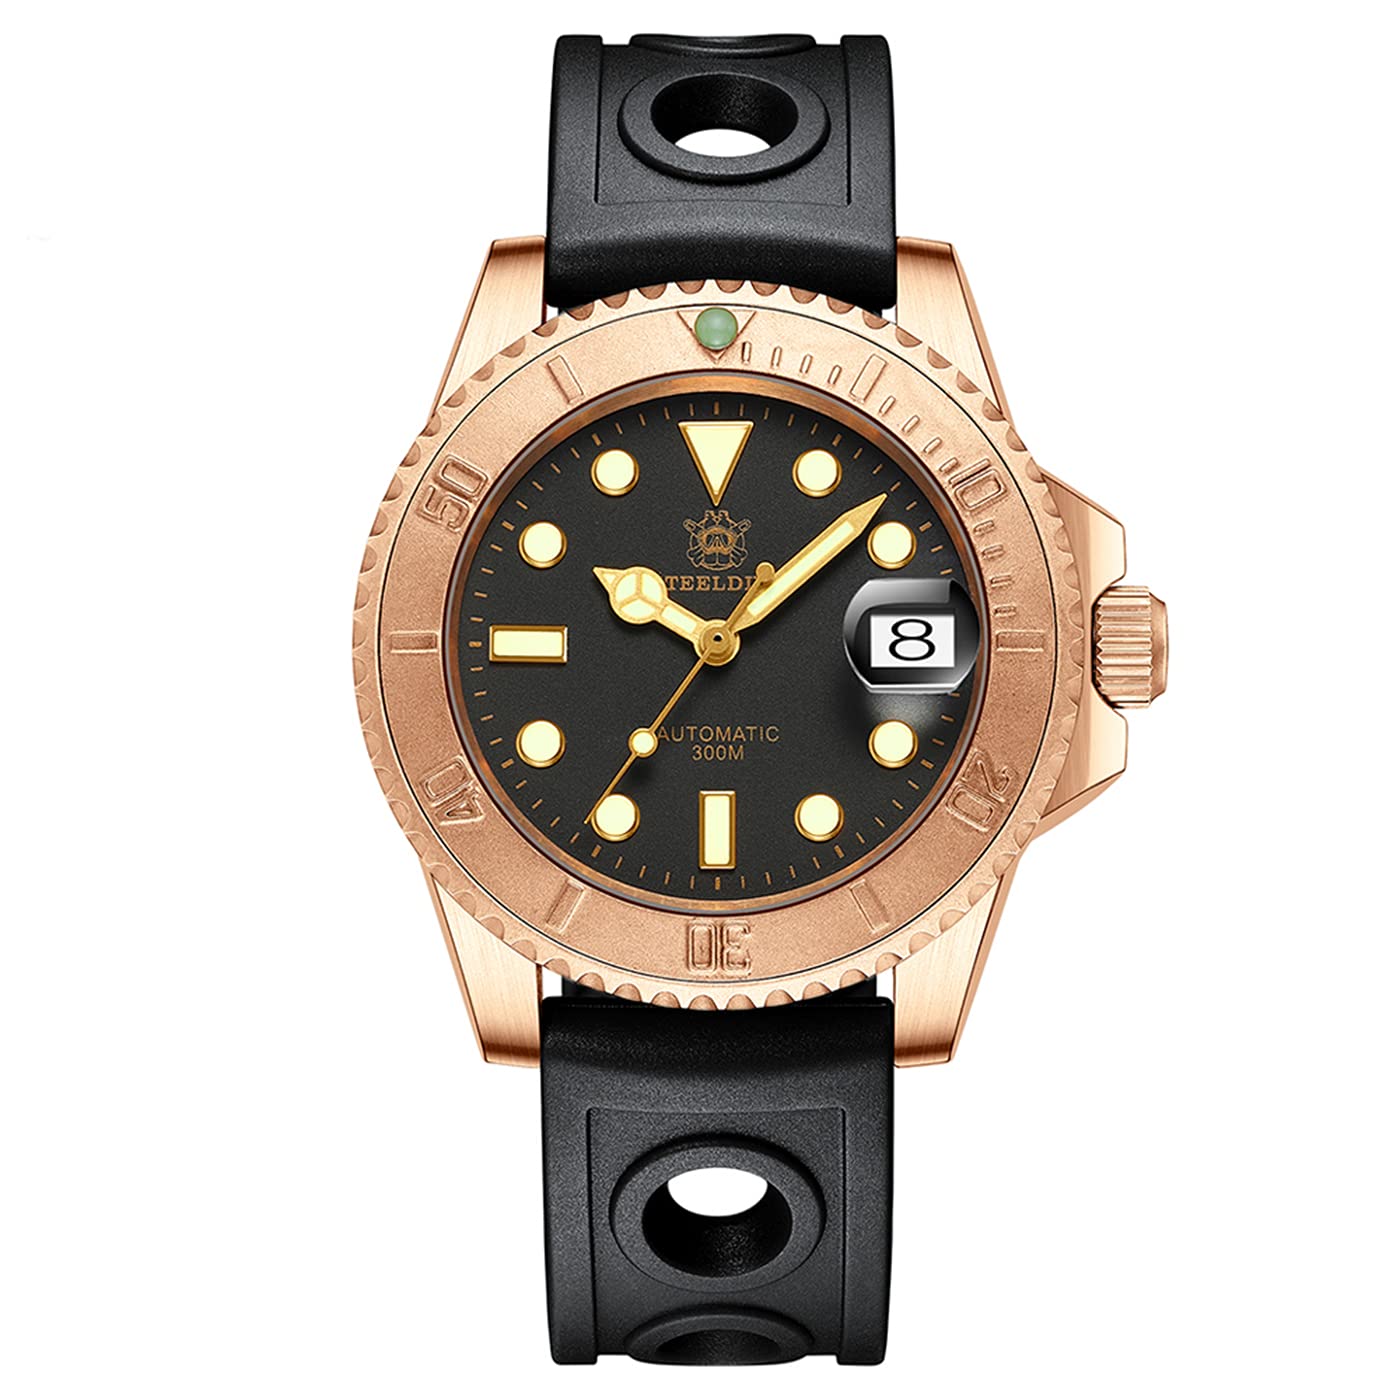 Steeldive SD1953S Bronze Dive Watch BGW9 Blue Lume 20ATM NH35 Mens Automatic Diving Watch